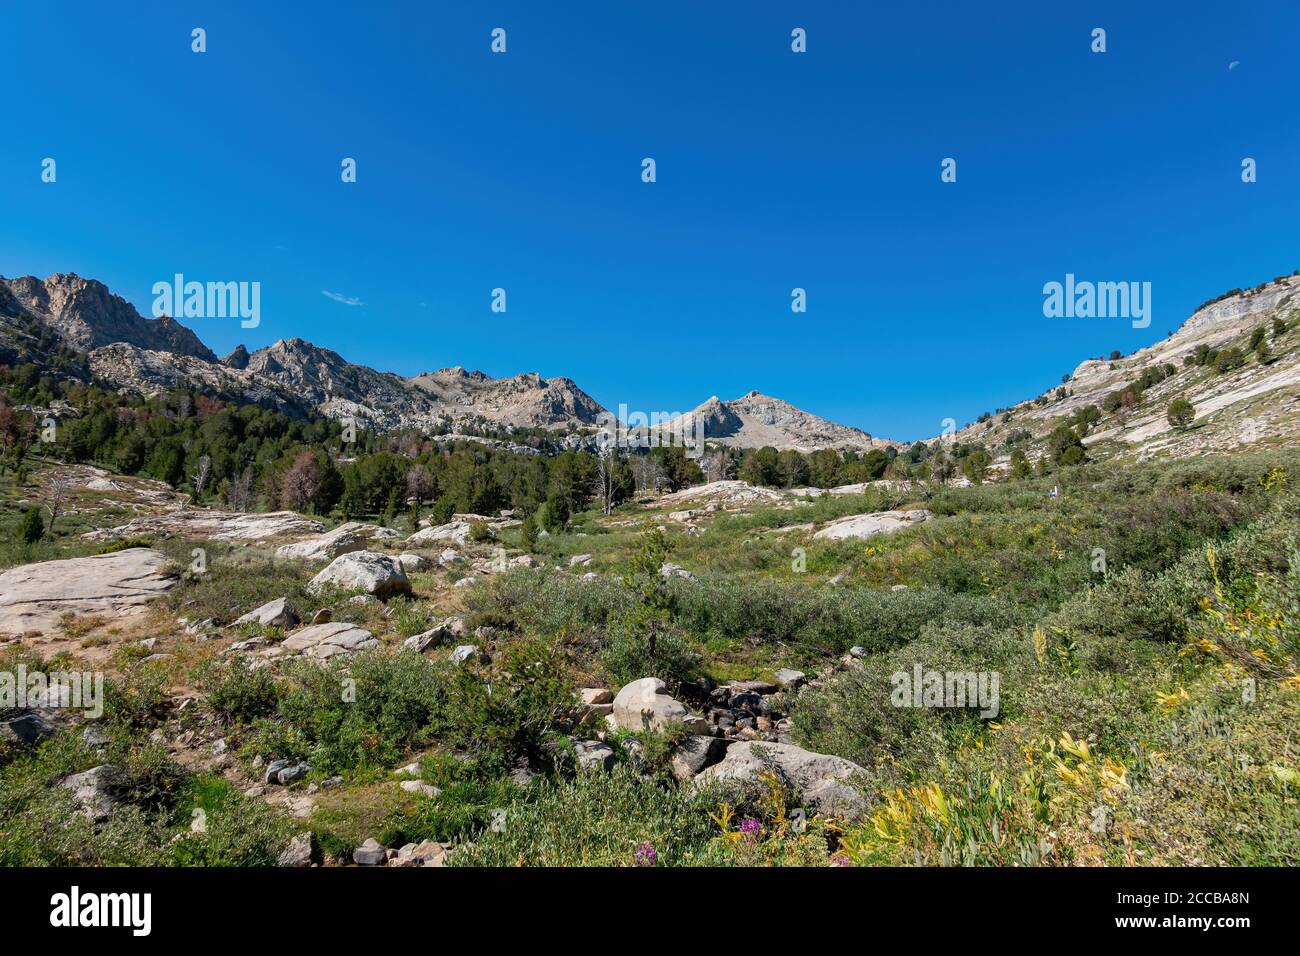 Morning view of the beautiful landscape around the Ruby Crest Trail of Ruby Mountain at Nevada Stock Photo